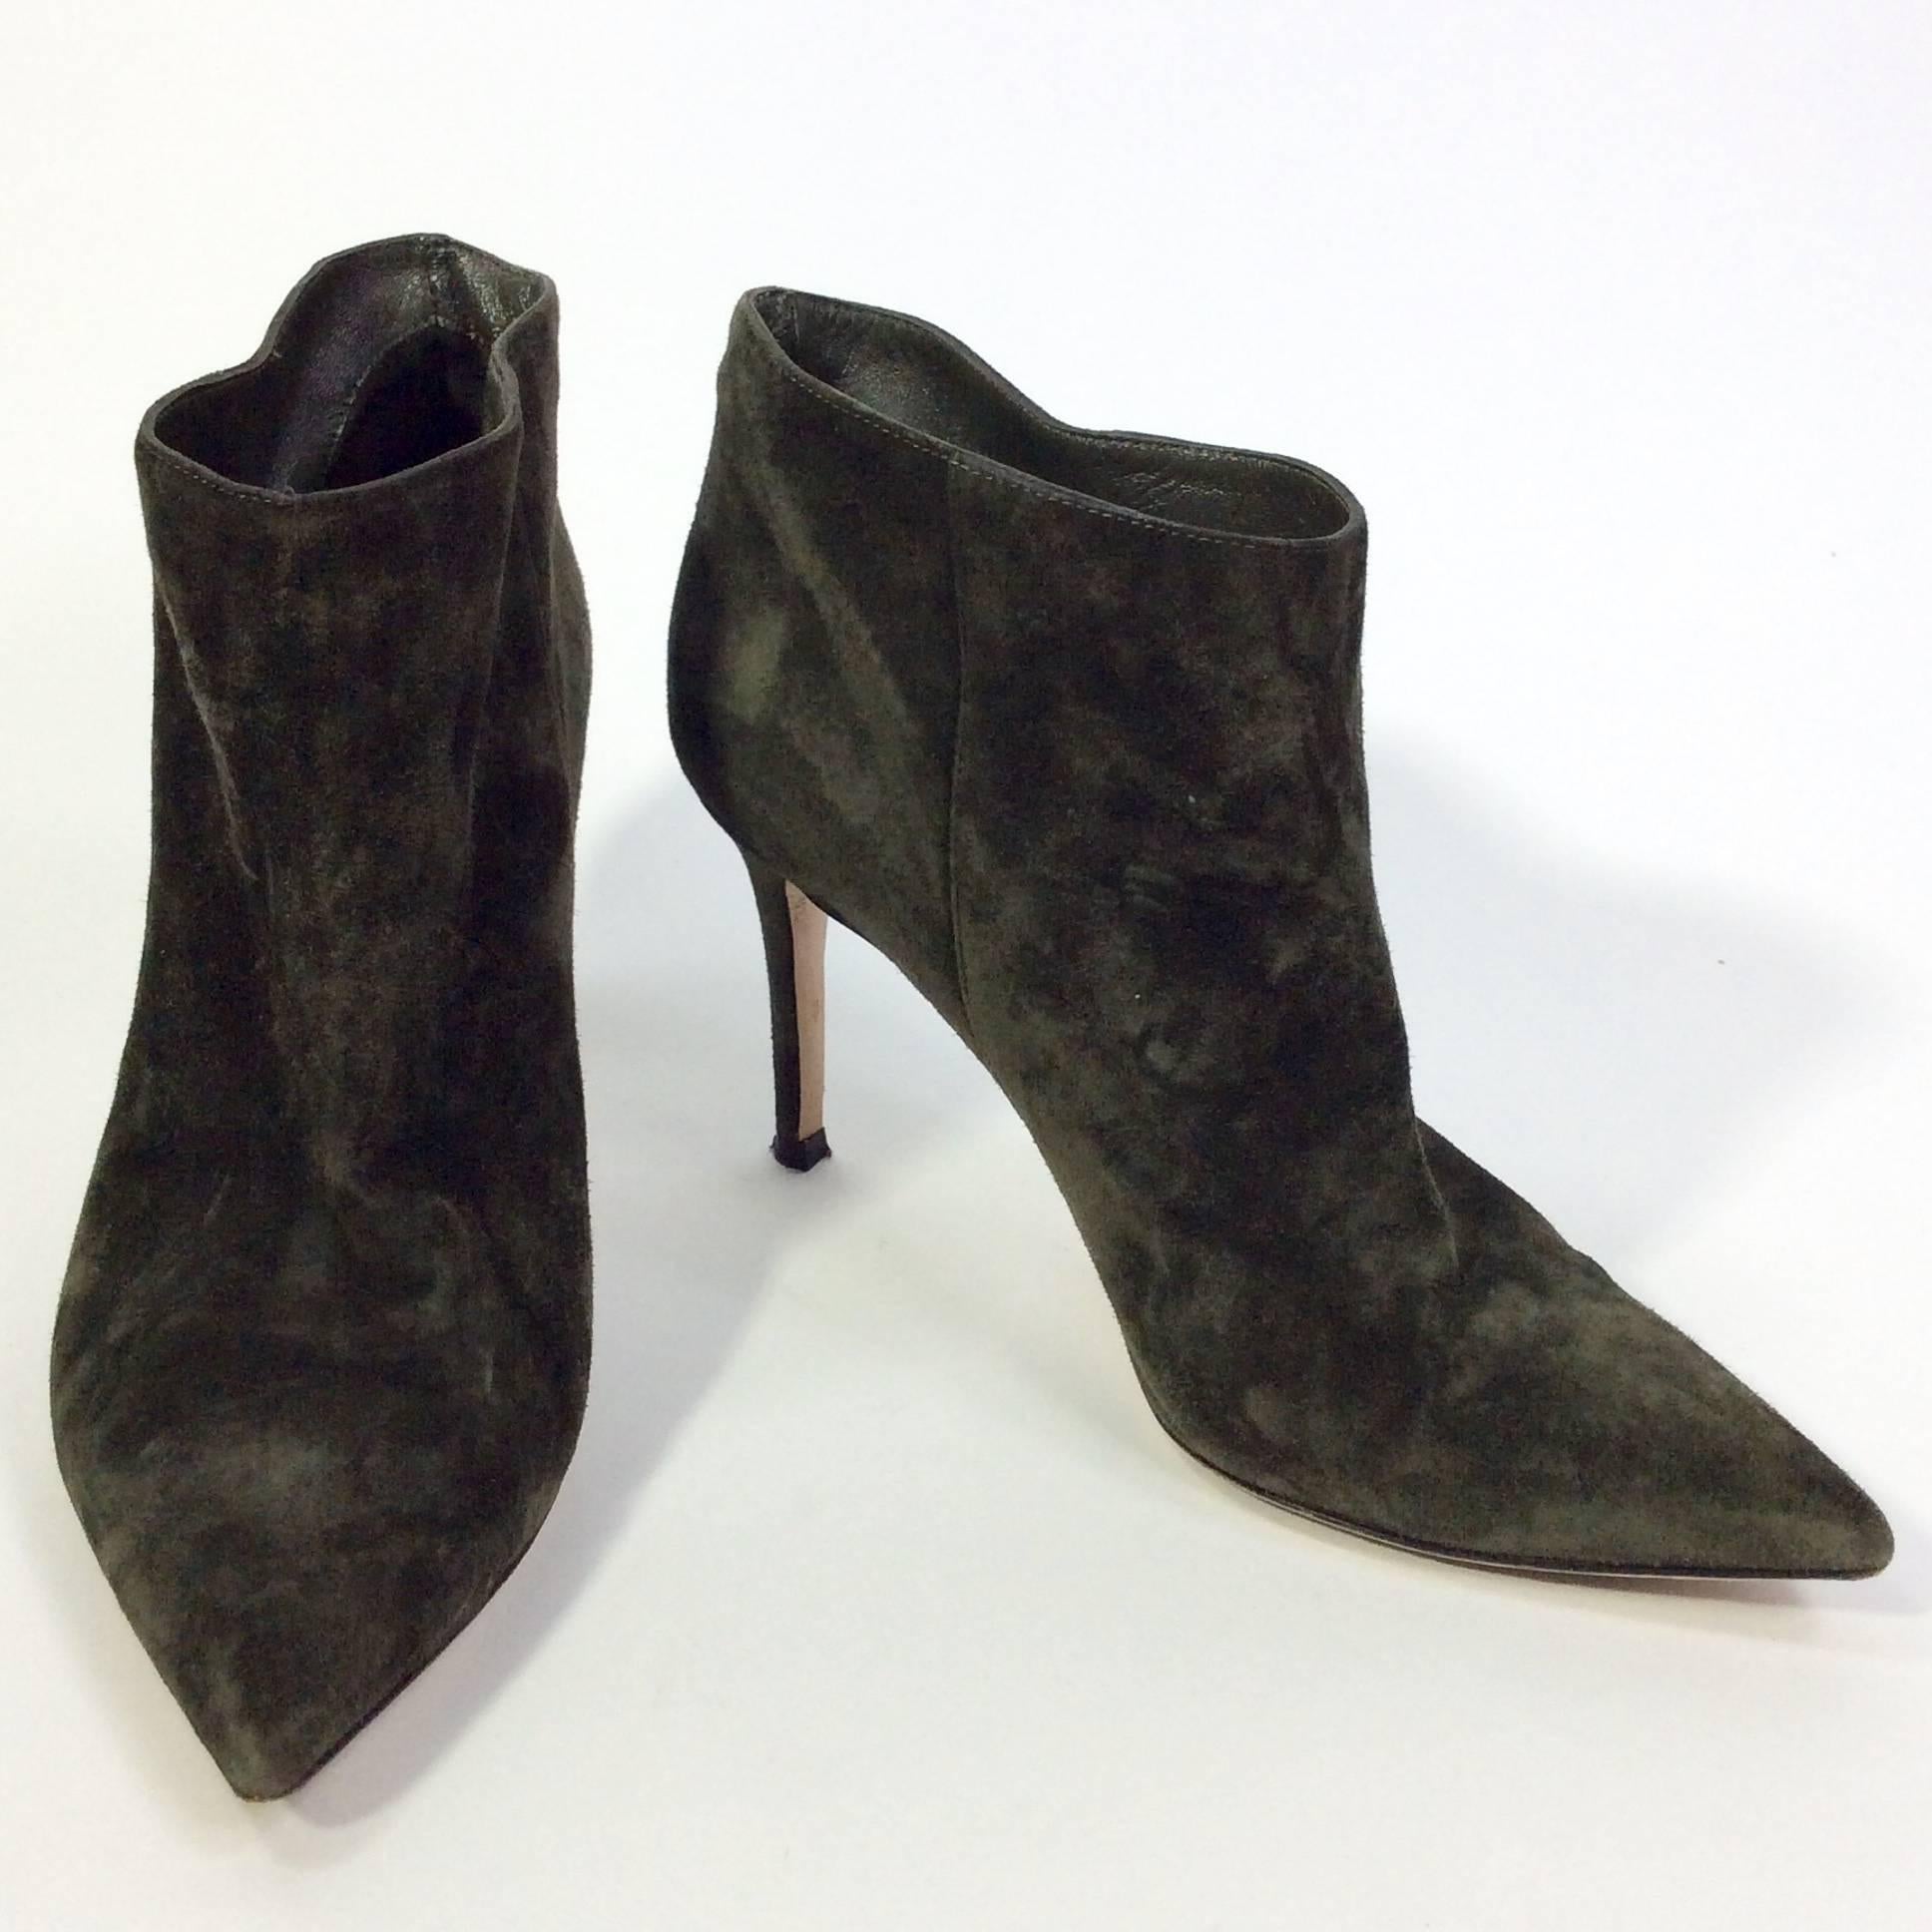 Olive Suede Pointed Bootie
3.5 inch heel
3 inch sole width
Pointed toe
Decorative seaming on either side of ankle
Minor wear on inside of heels
Size 37.5 (equates to a US 7)
Green suede with leather lining